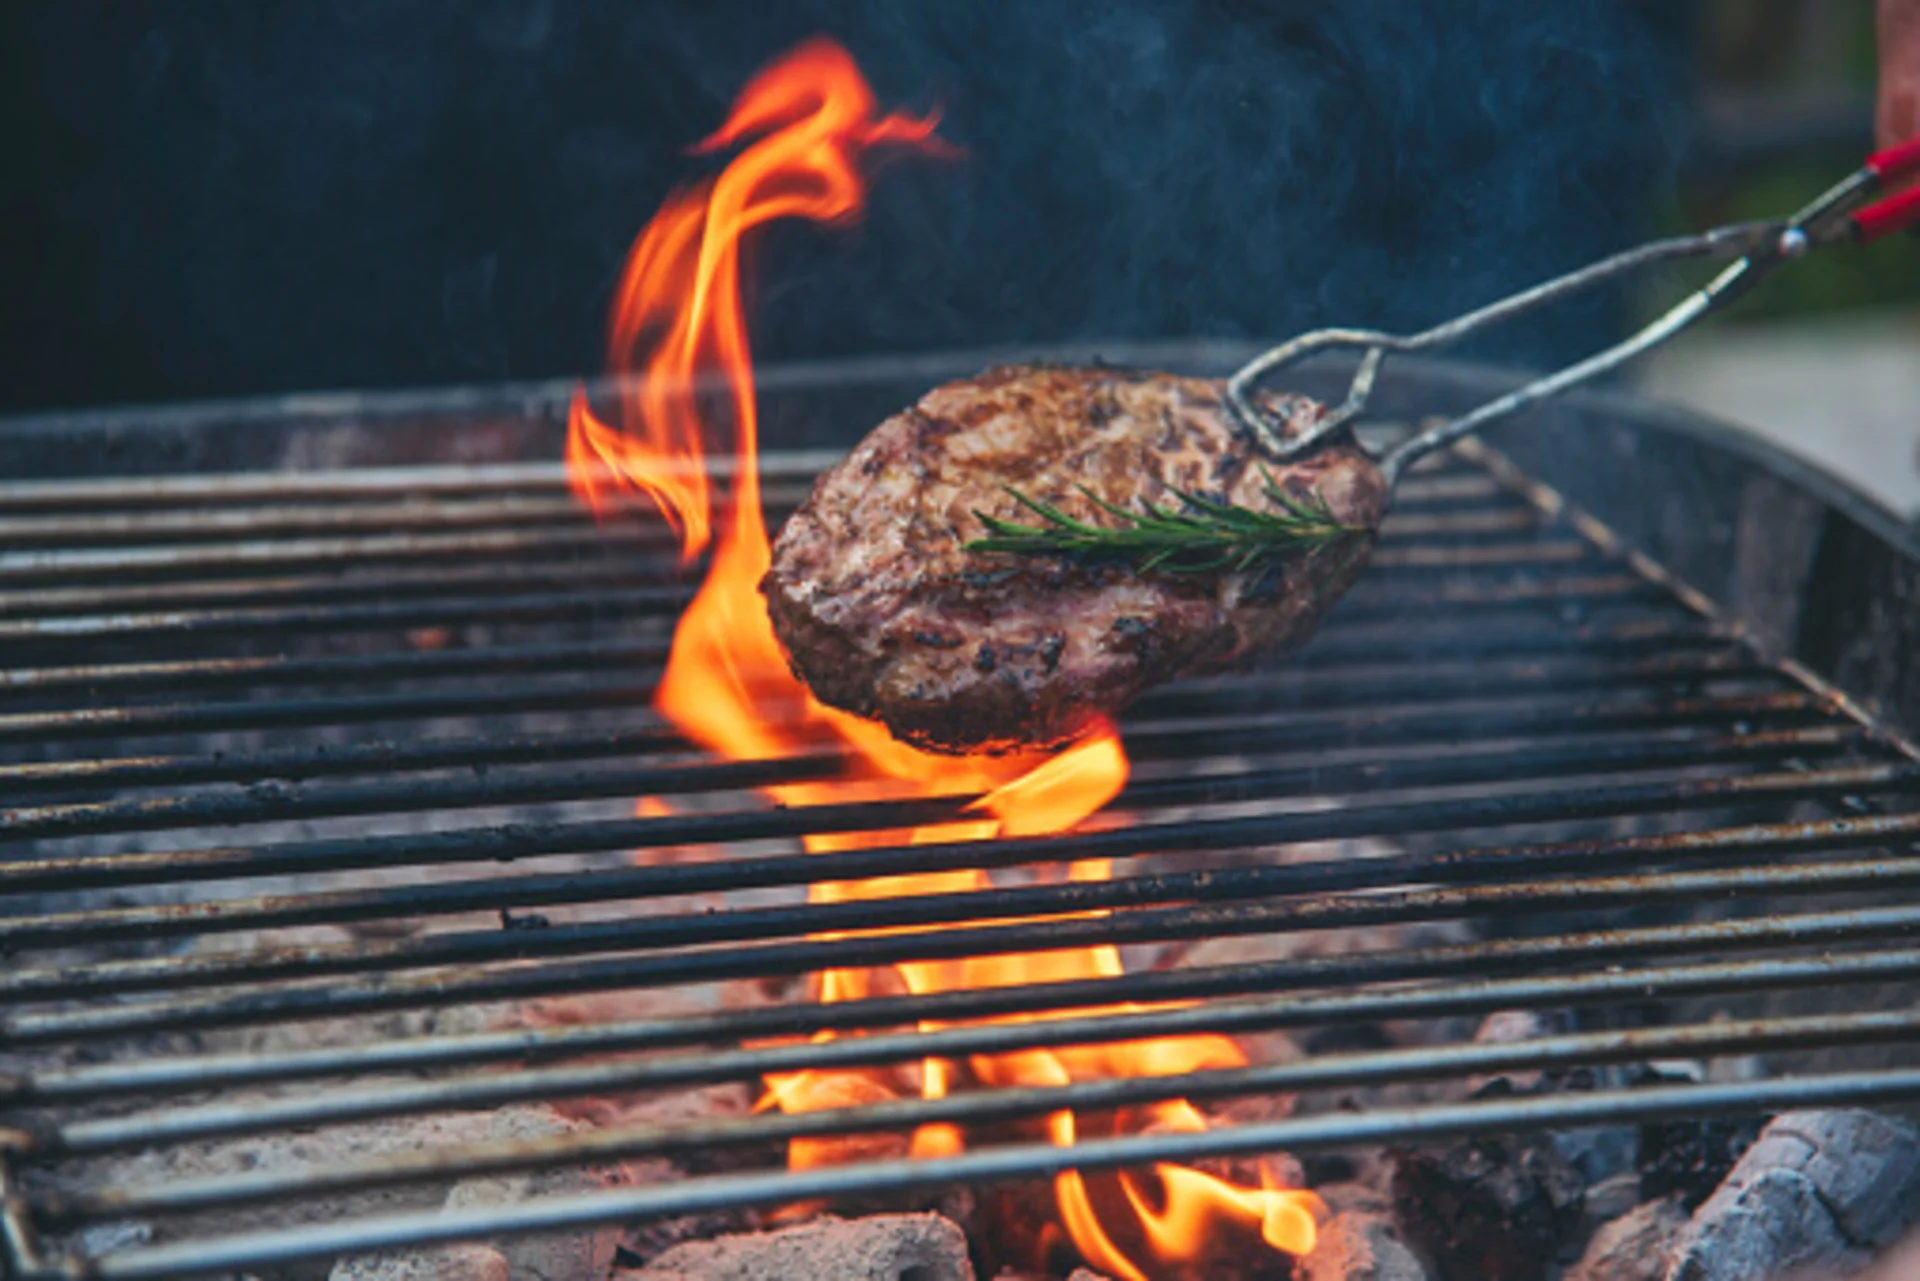 Summertime barbecues are favourites for many Canadians. Master the grill with these expert barbecue tips!